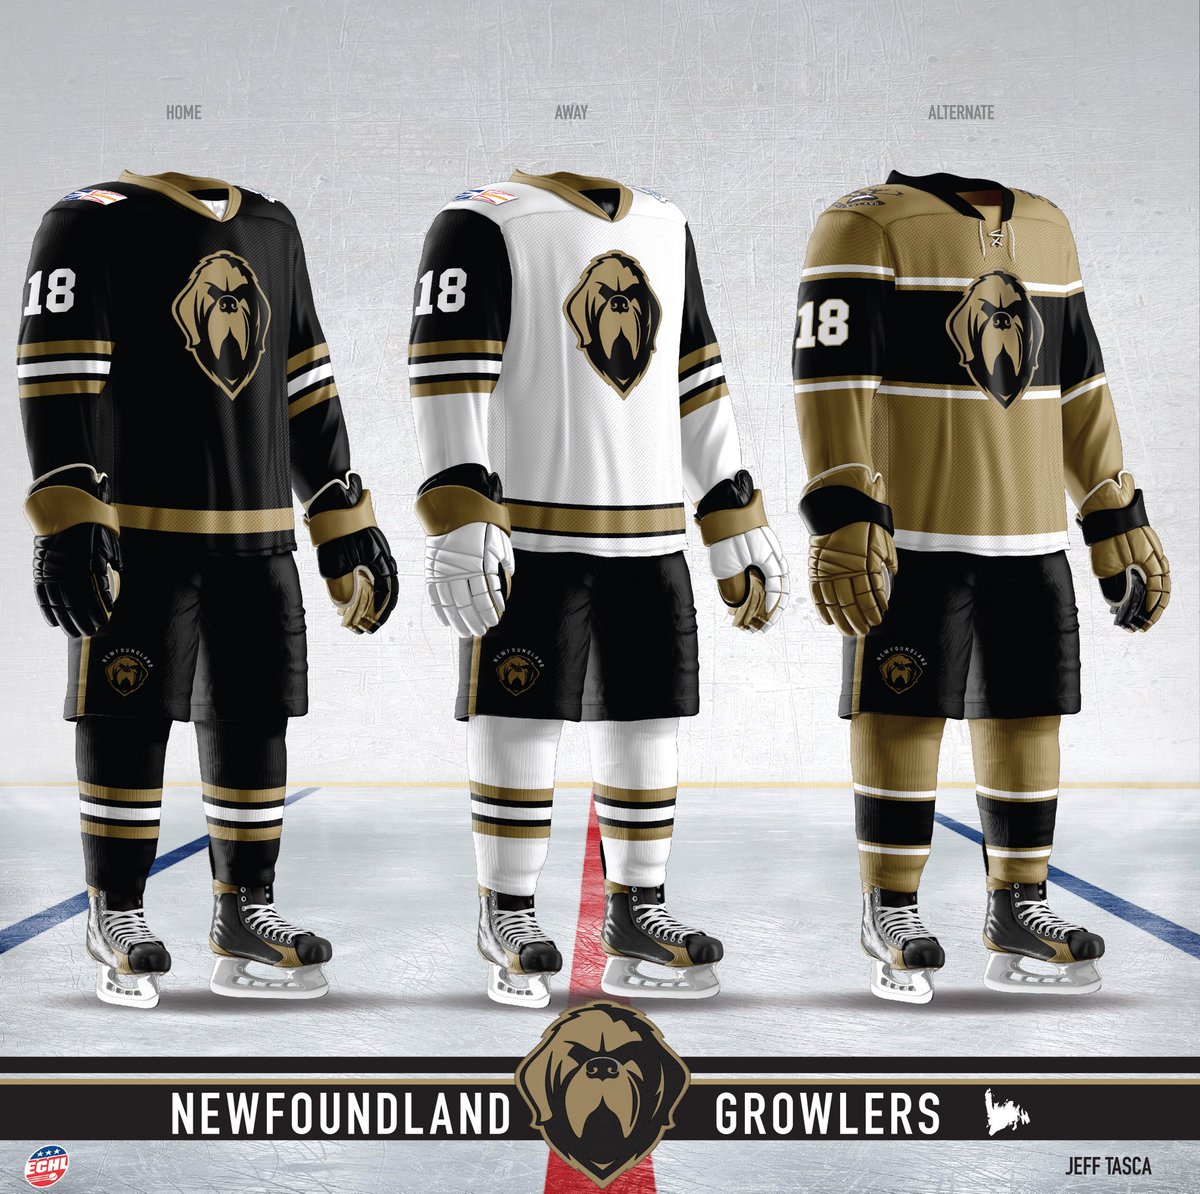 Jeff on Twitter: "The Newfoundland Growlers set. Now with ...